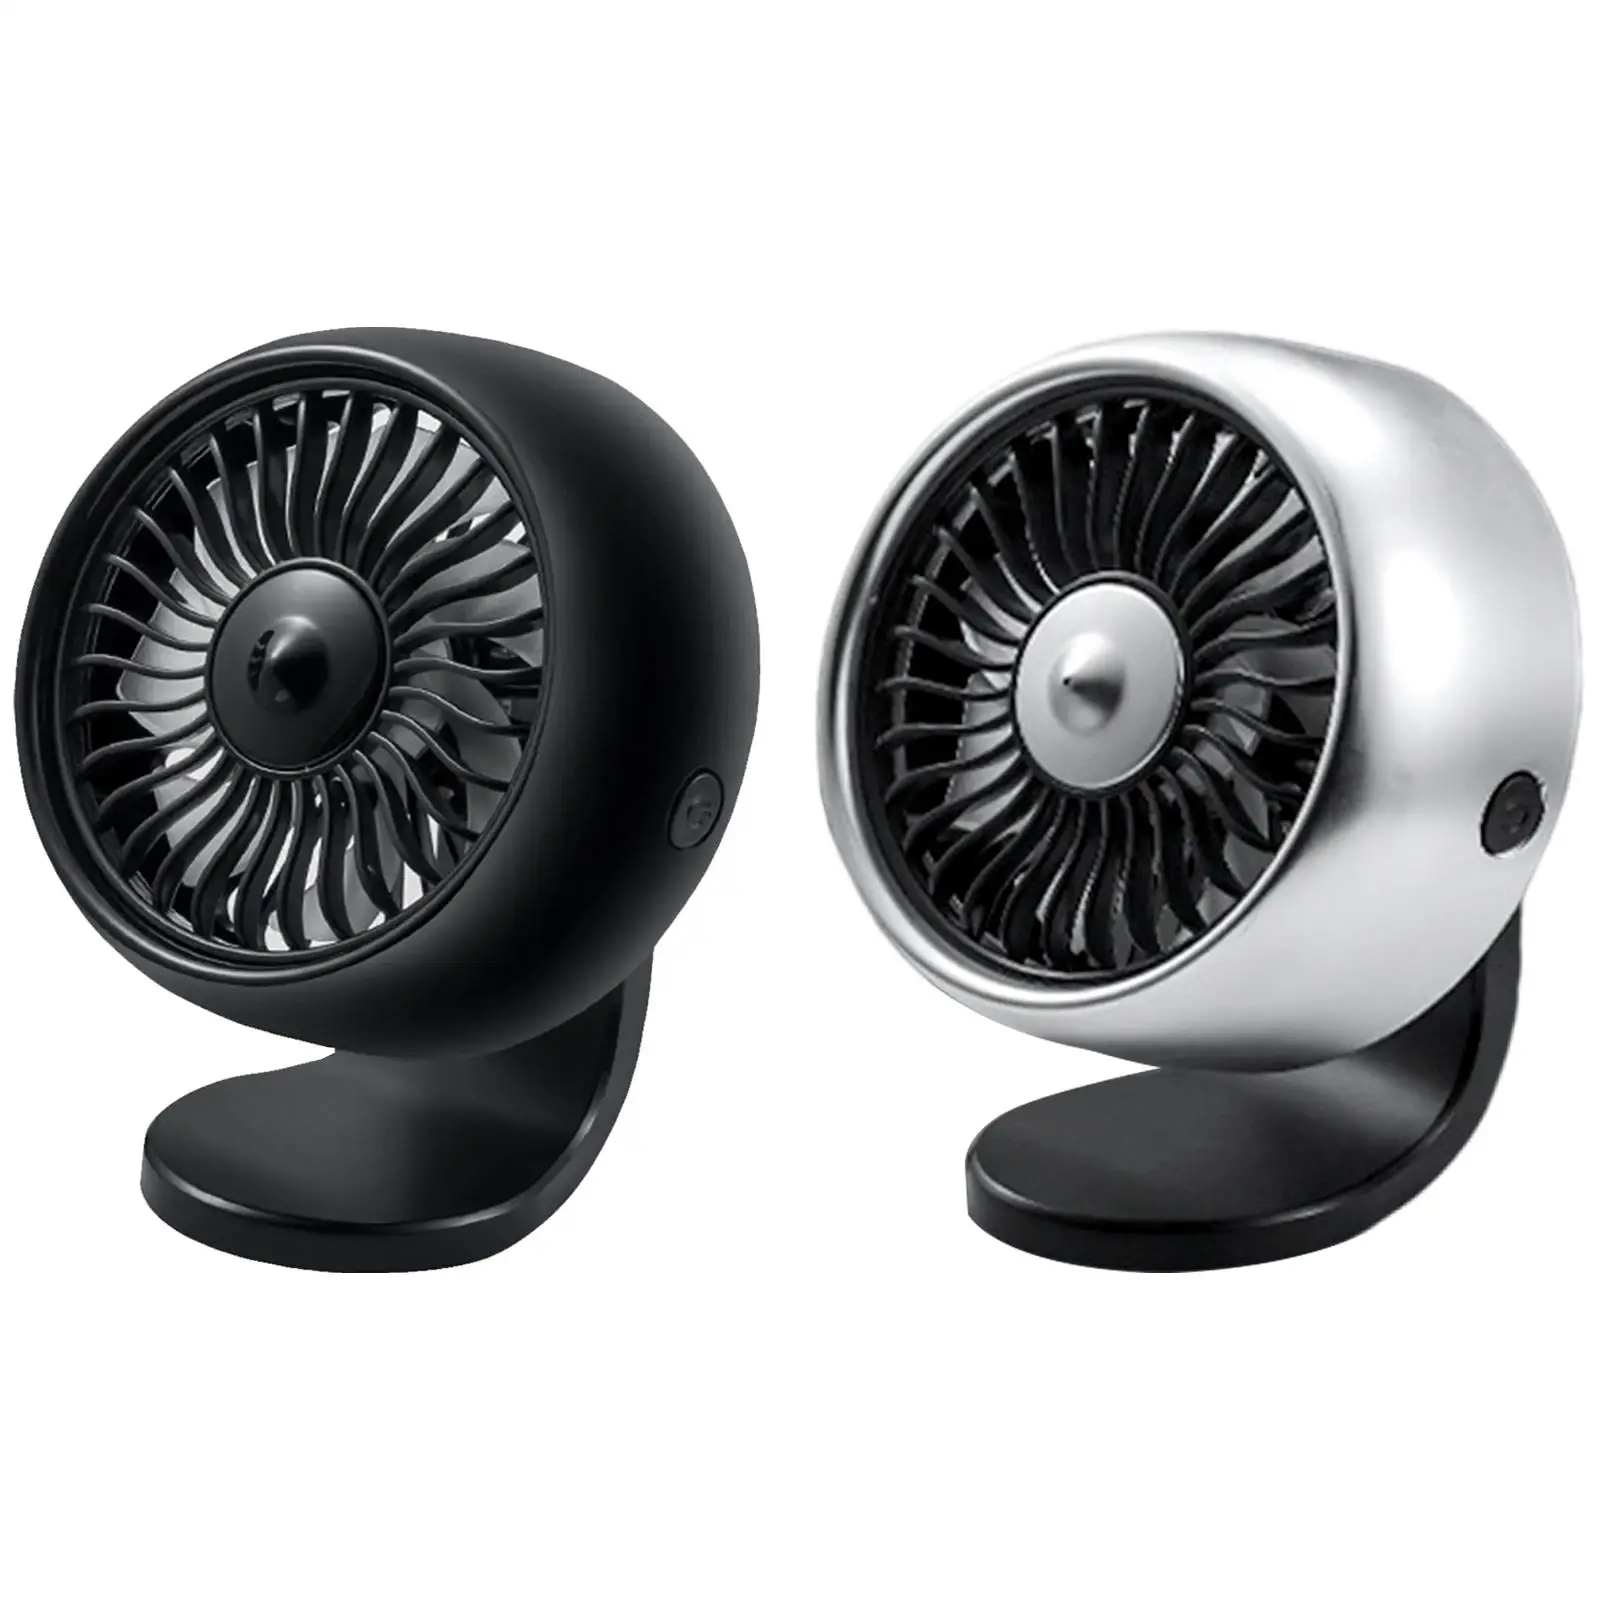 Car Fan Air Vent Mount 3 Speed Universal with Colorful Light Cooling Fan Fits for Auto